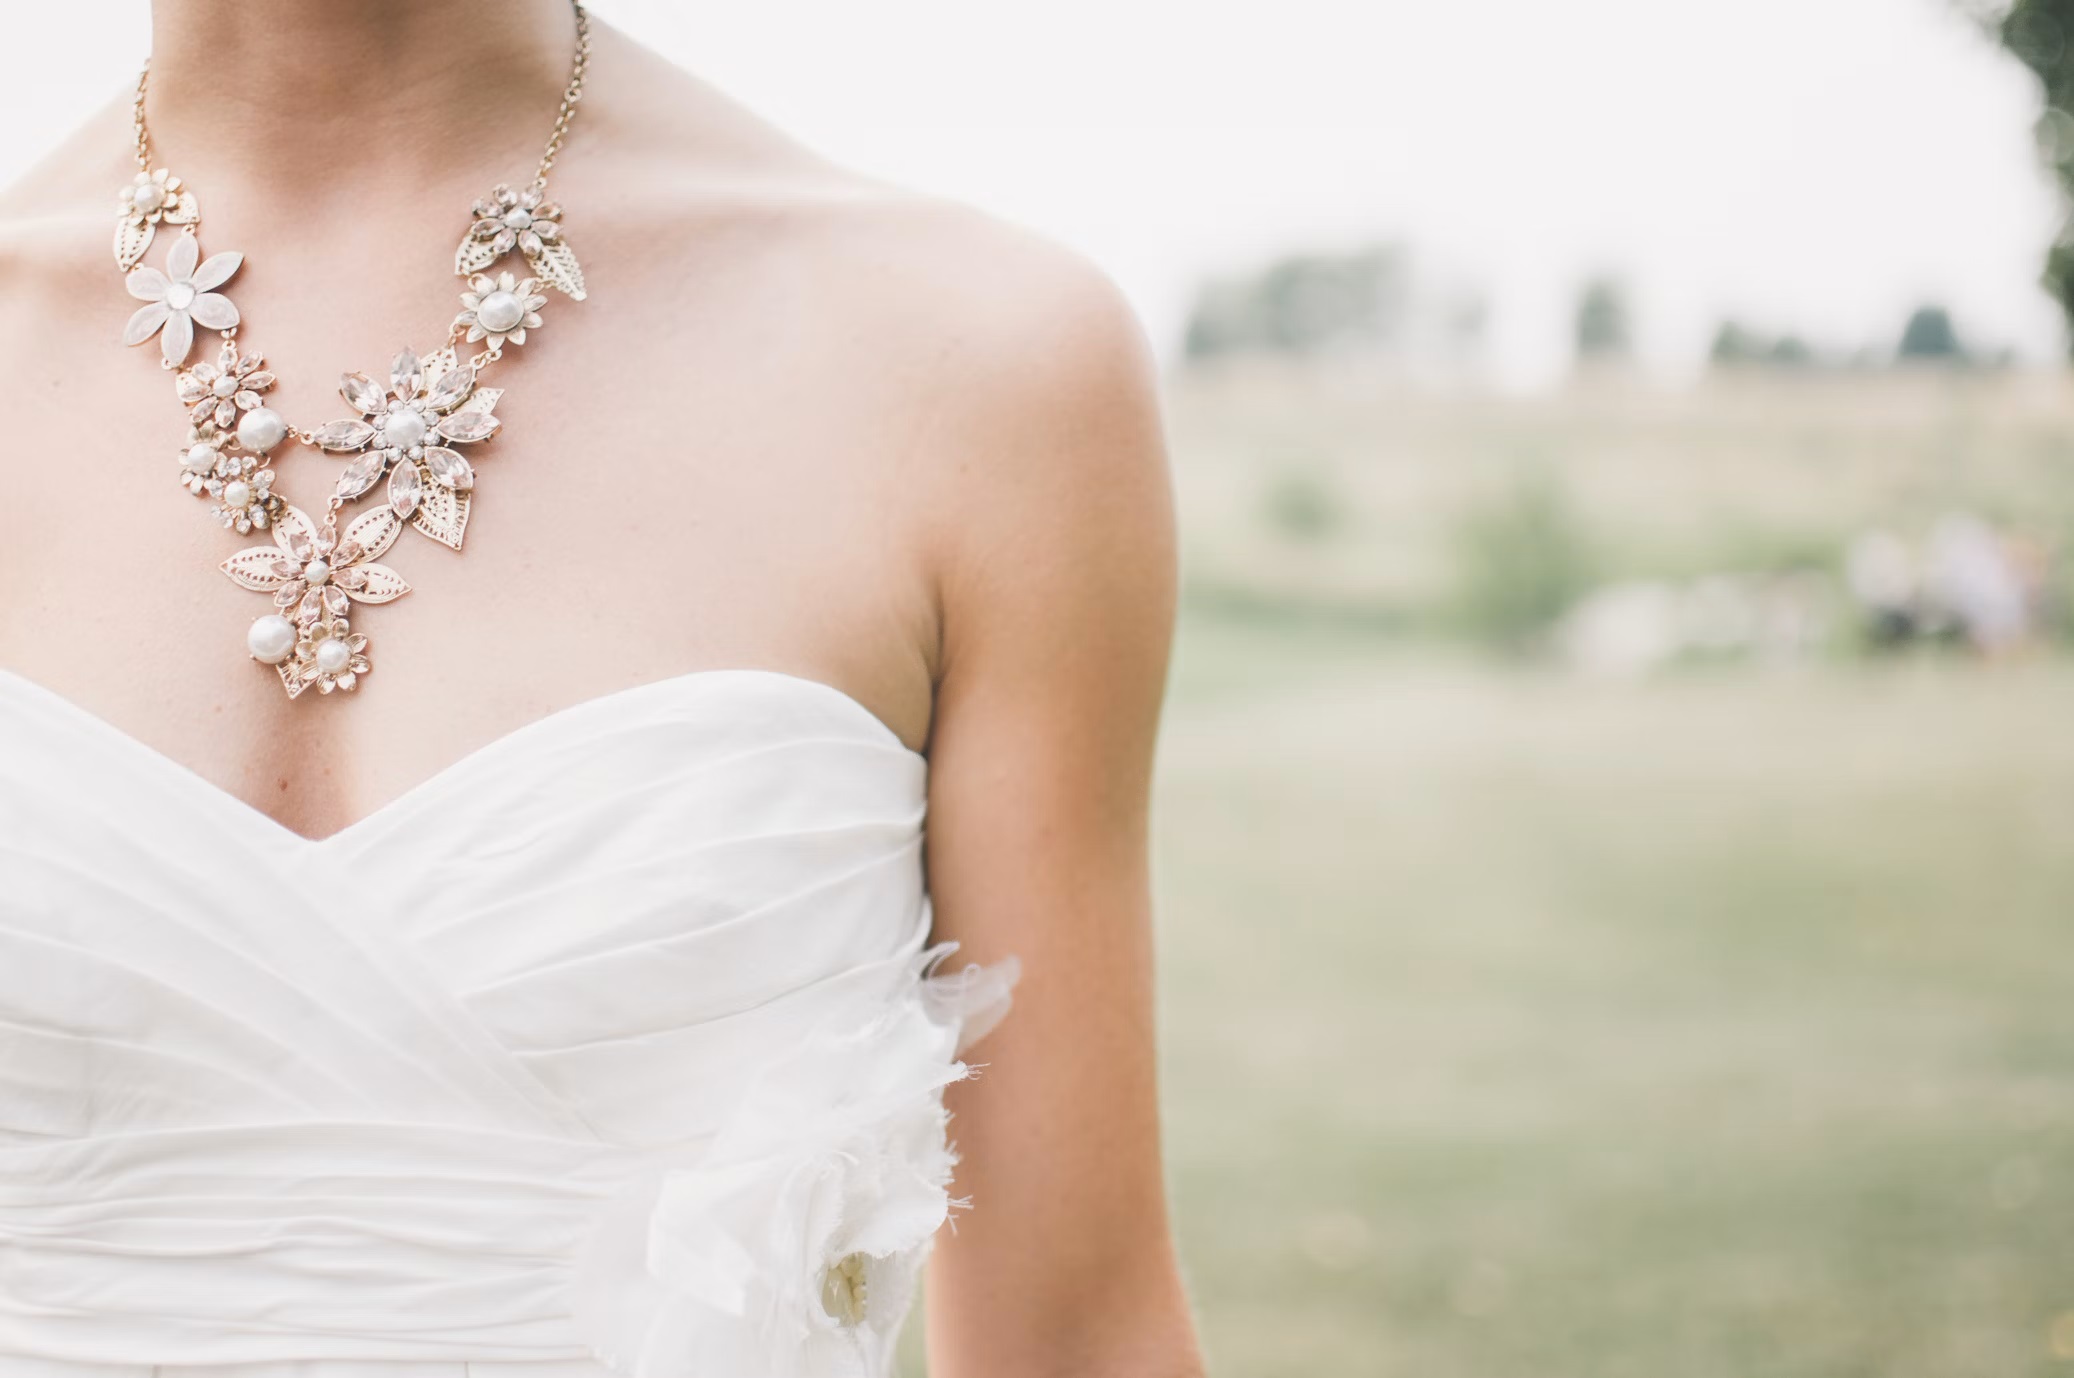 Mother of Pearl into Wedding Jewelry